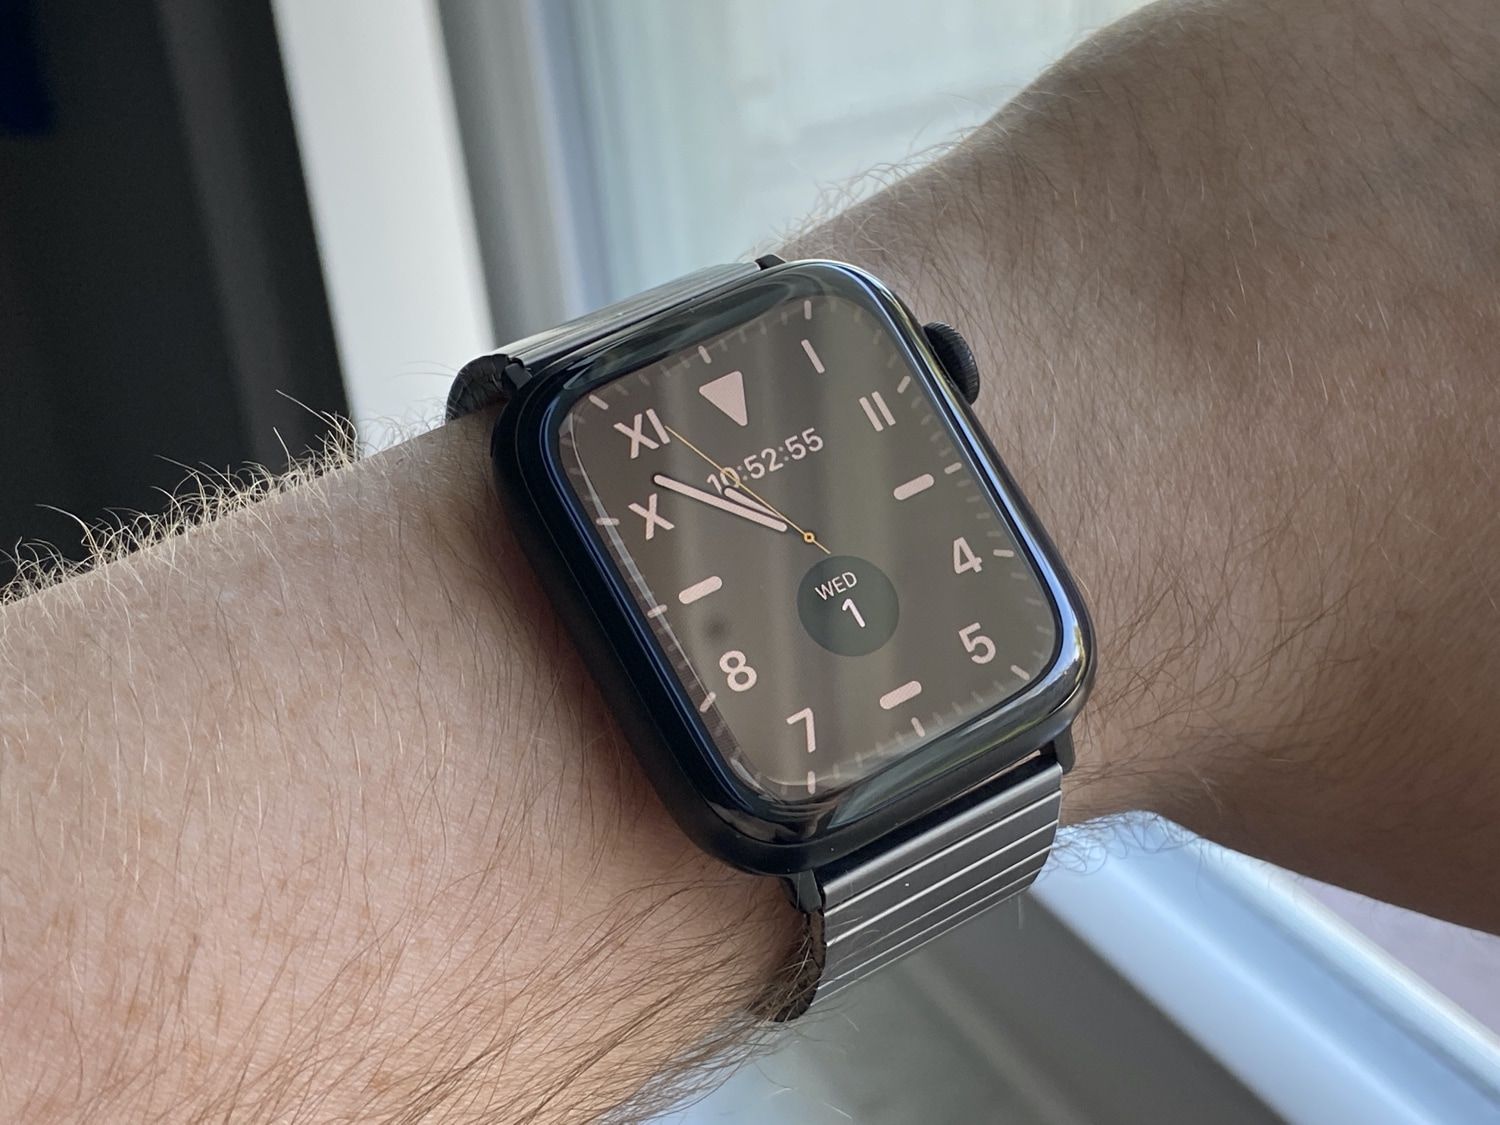 Apple Releases WatchOS 6.2.1 With FaceTime Bug Fix